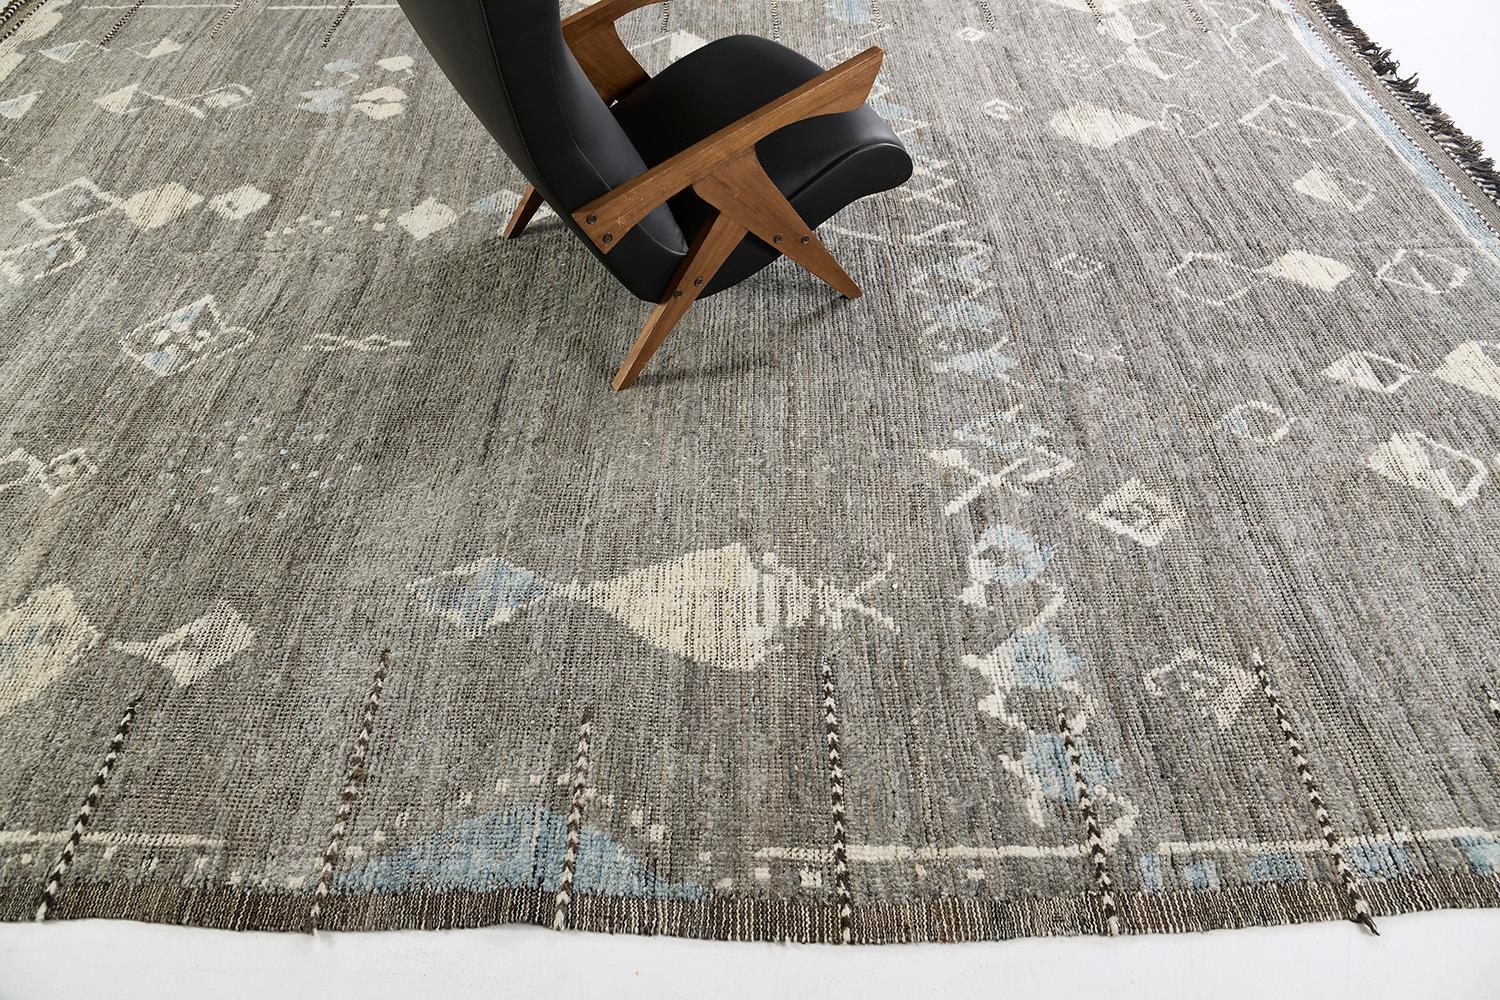 Tajeddigt is gorgeous wool that uses linework and ambiguous Berber symbols that telling of the narrative. Gray and blue tones are added to strengthen the creativeness of the designer. Mehraban's Atlas collection is noted for its saturated color,